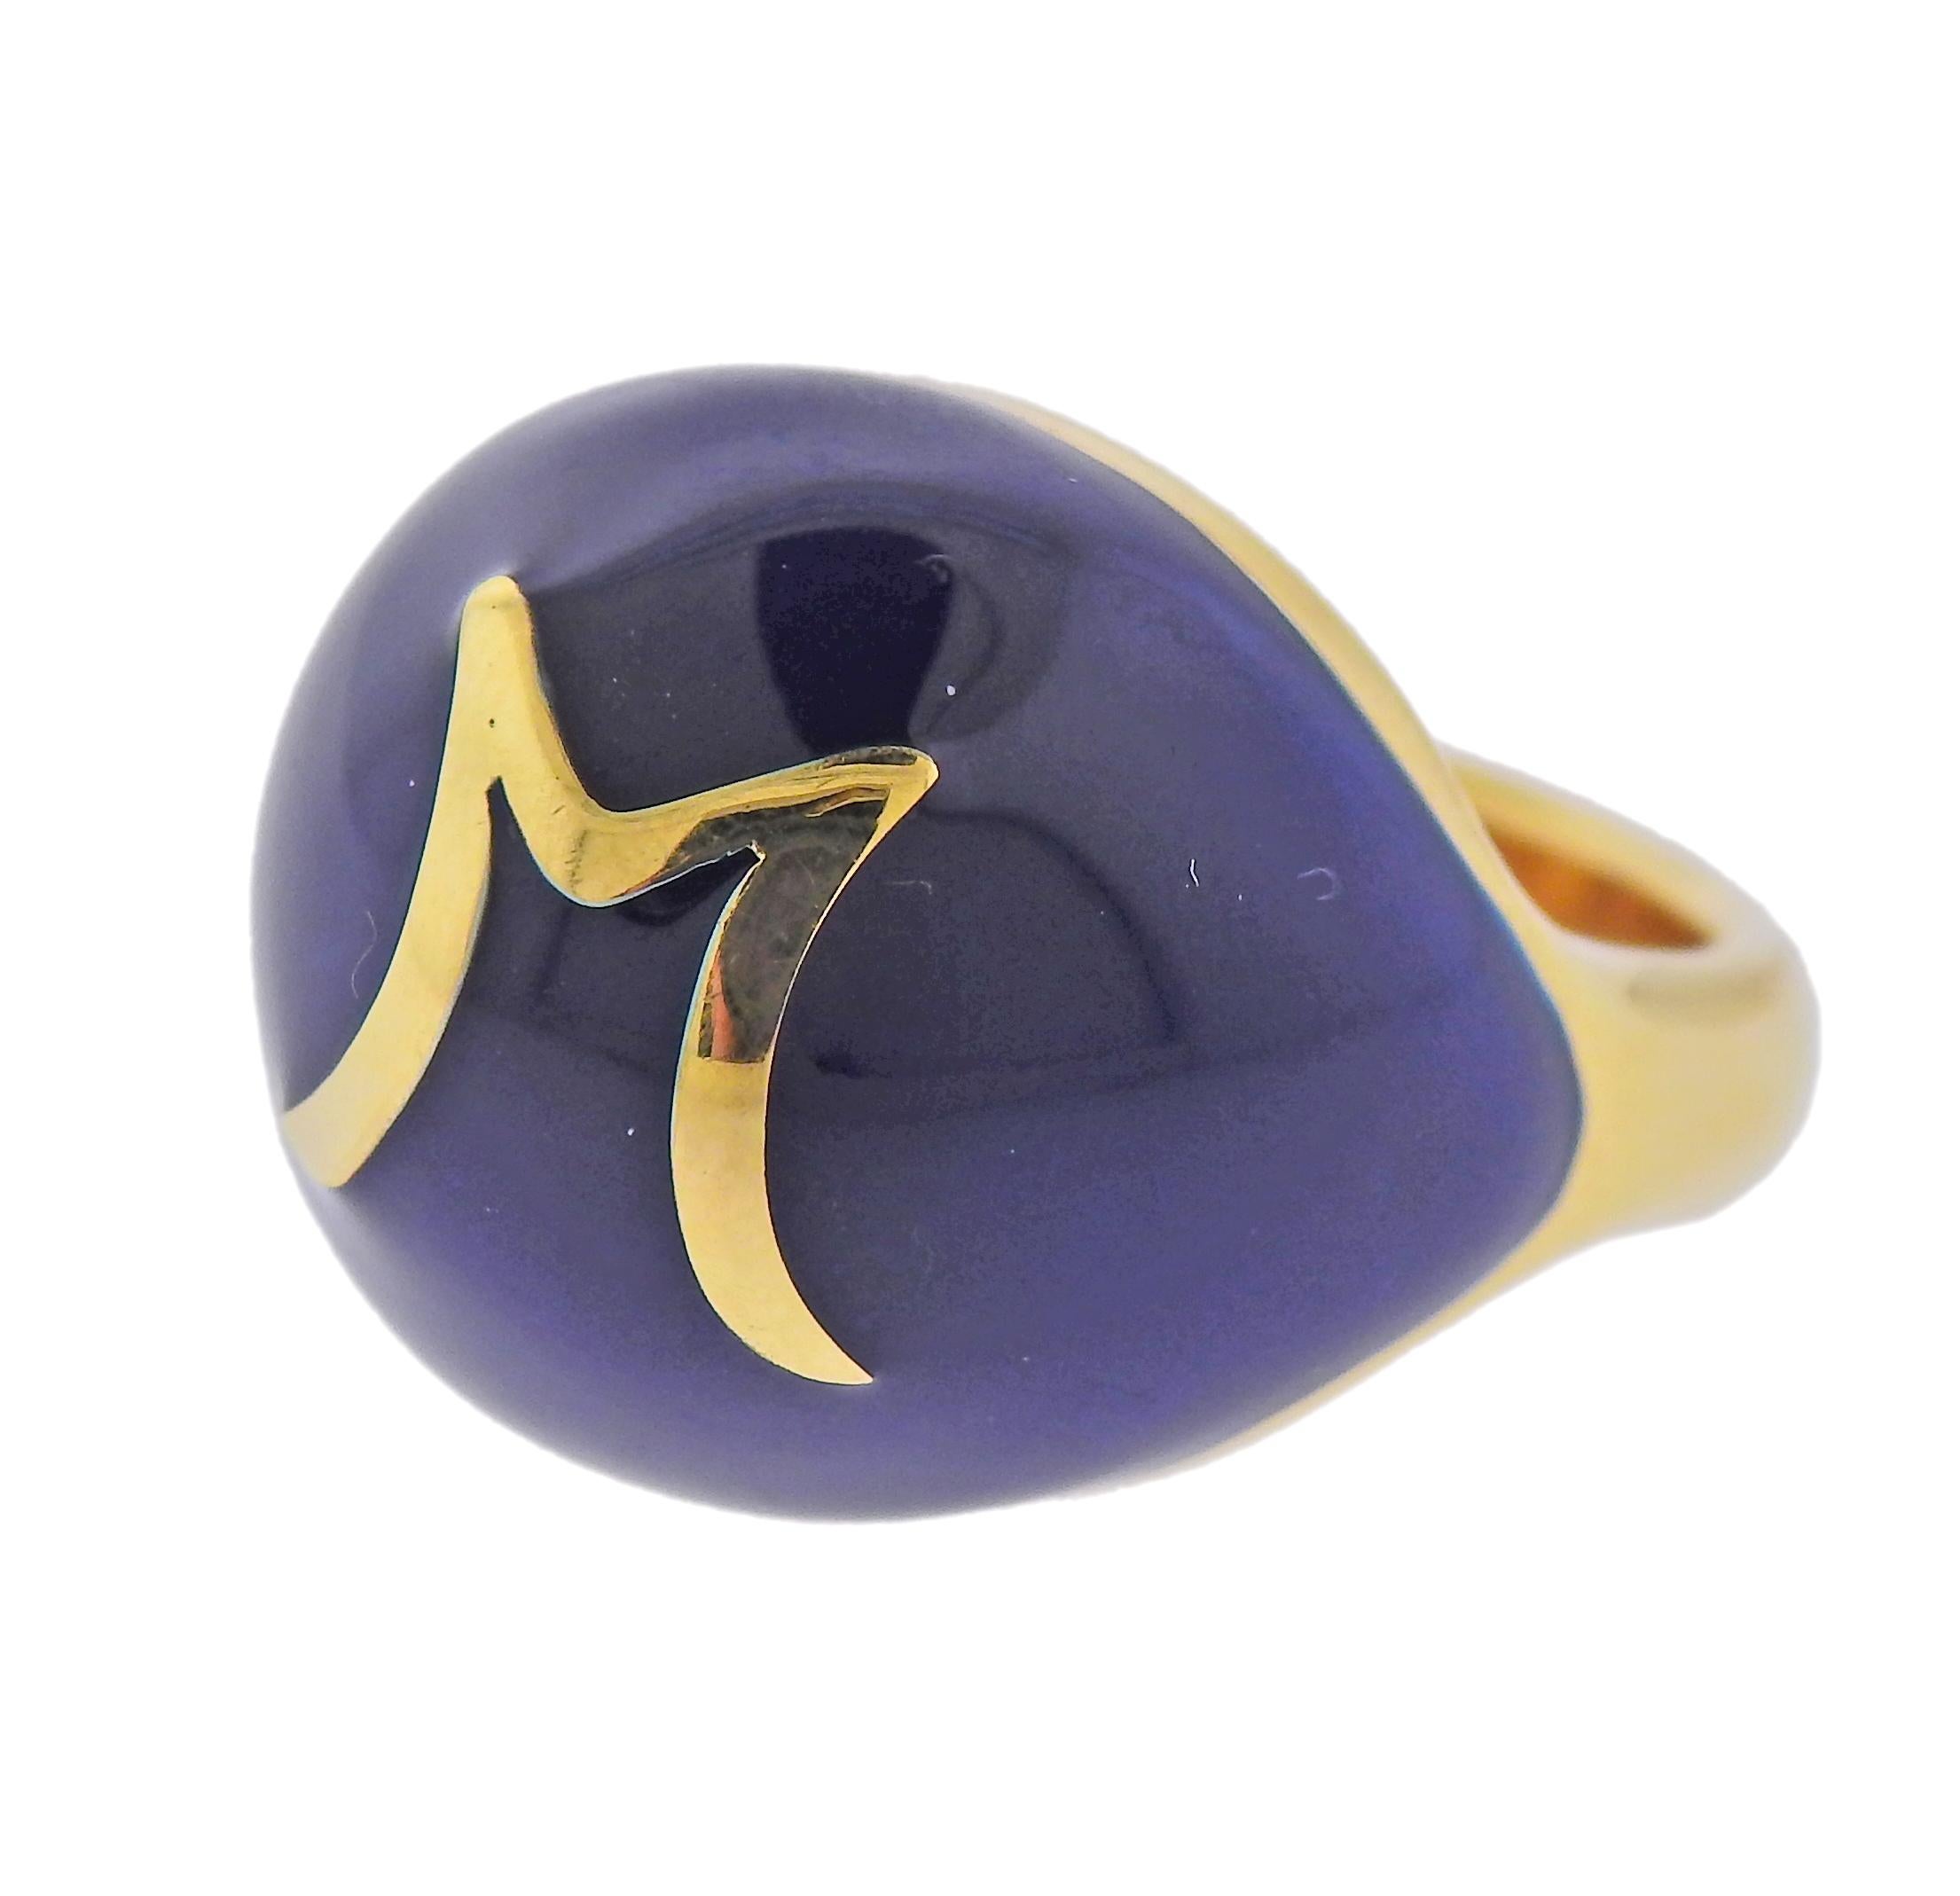 18k gold dome ring with blue enamel top. Ring size - 6.5, ring top - 18mm x 23mm. Marked: 750. Weight - 21.8 grams